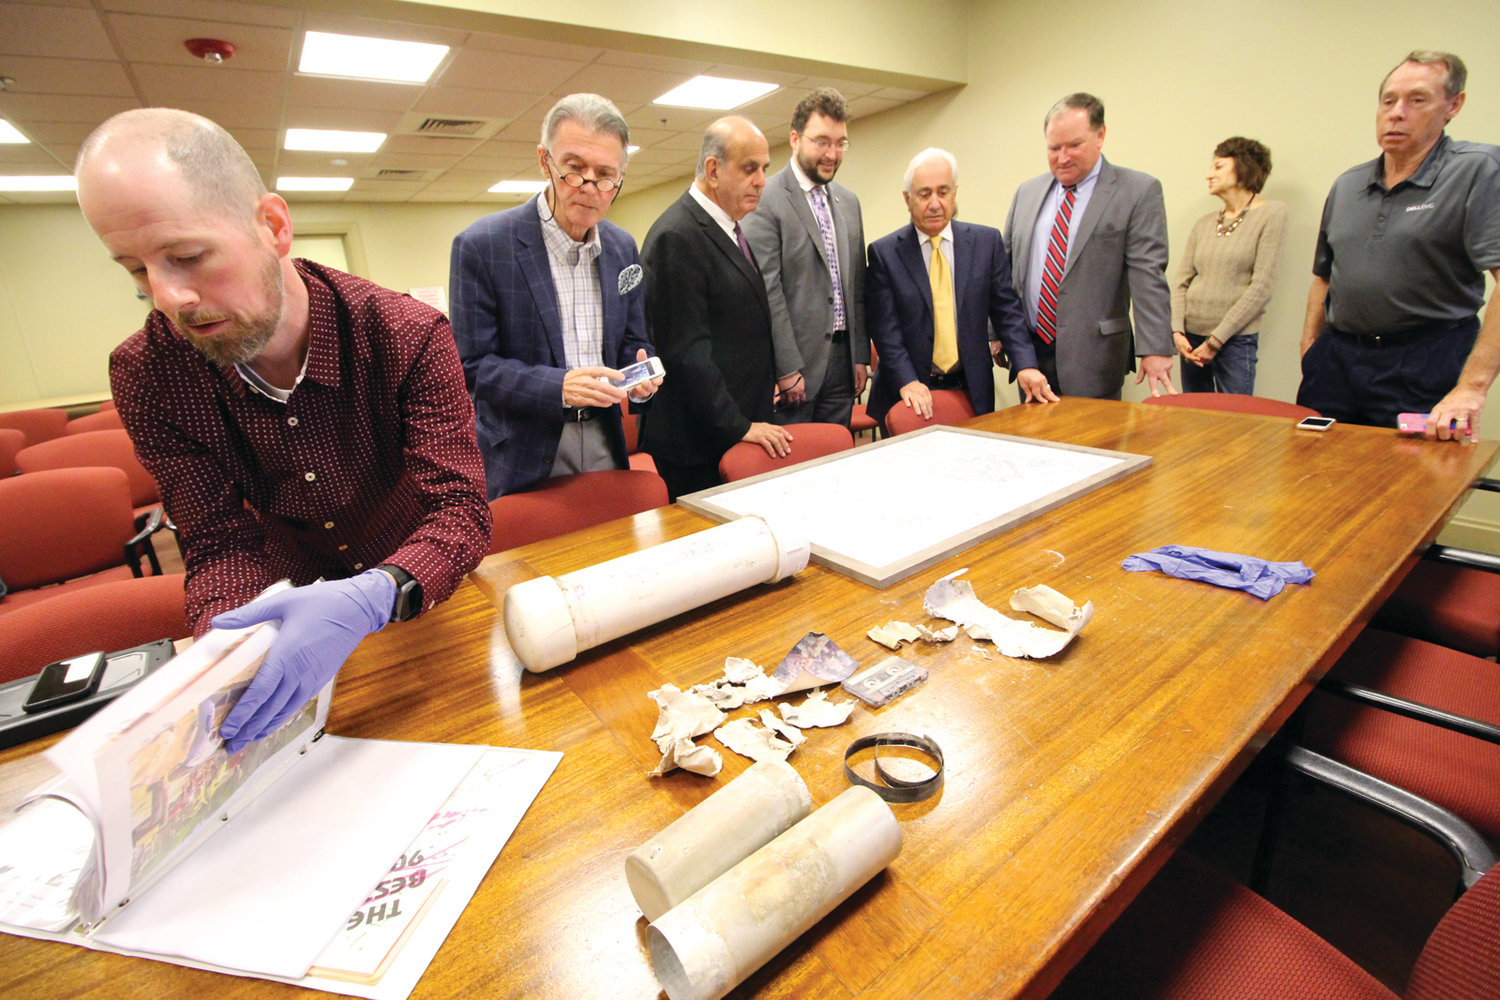 CAPSULE AND ITS CONTENTS: Marc Berman, who was a student at Rhodes School, looks through drawings of the school playground where the time capsule, seen in front of him, was buried 32 years ago. With him are those who gathered for the opening of the capsule Thursday morning.